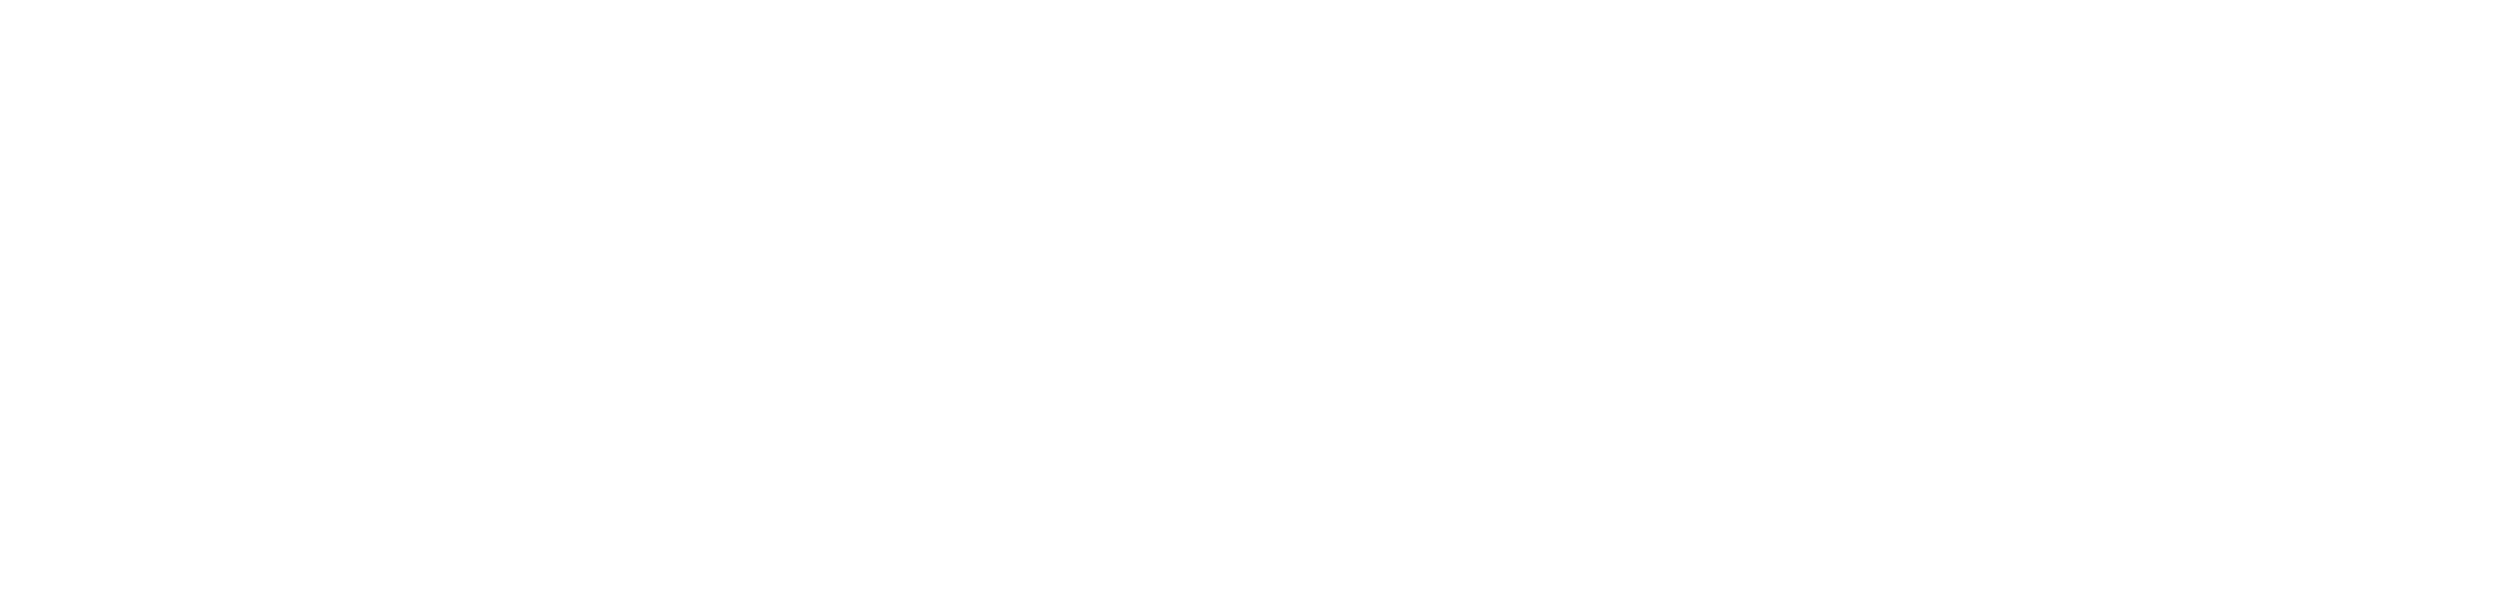 Heather Collins Consulting